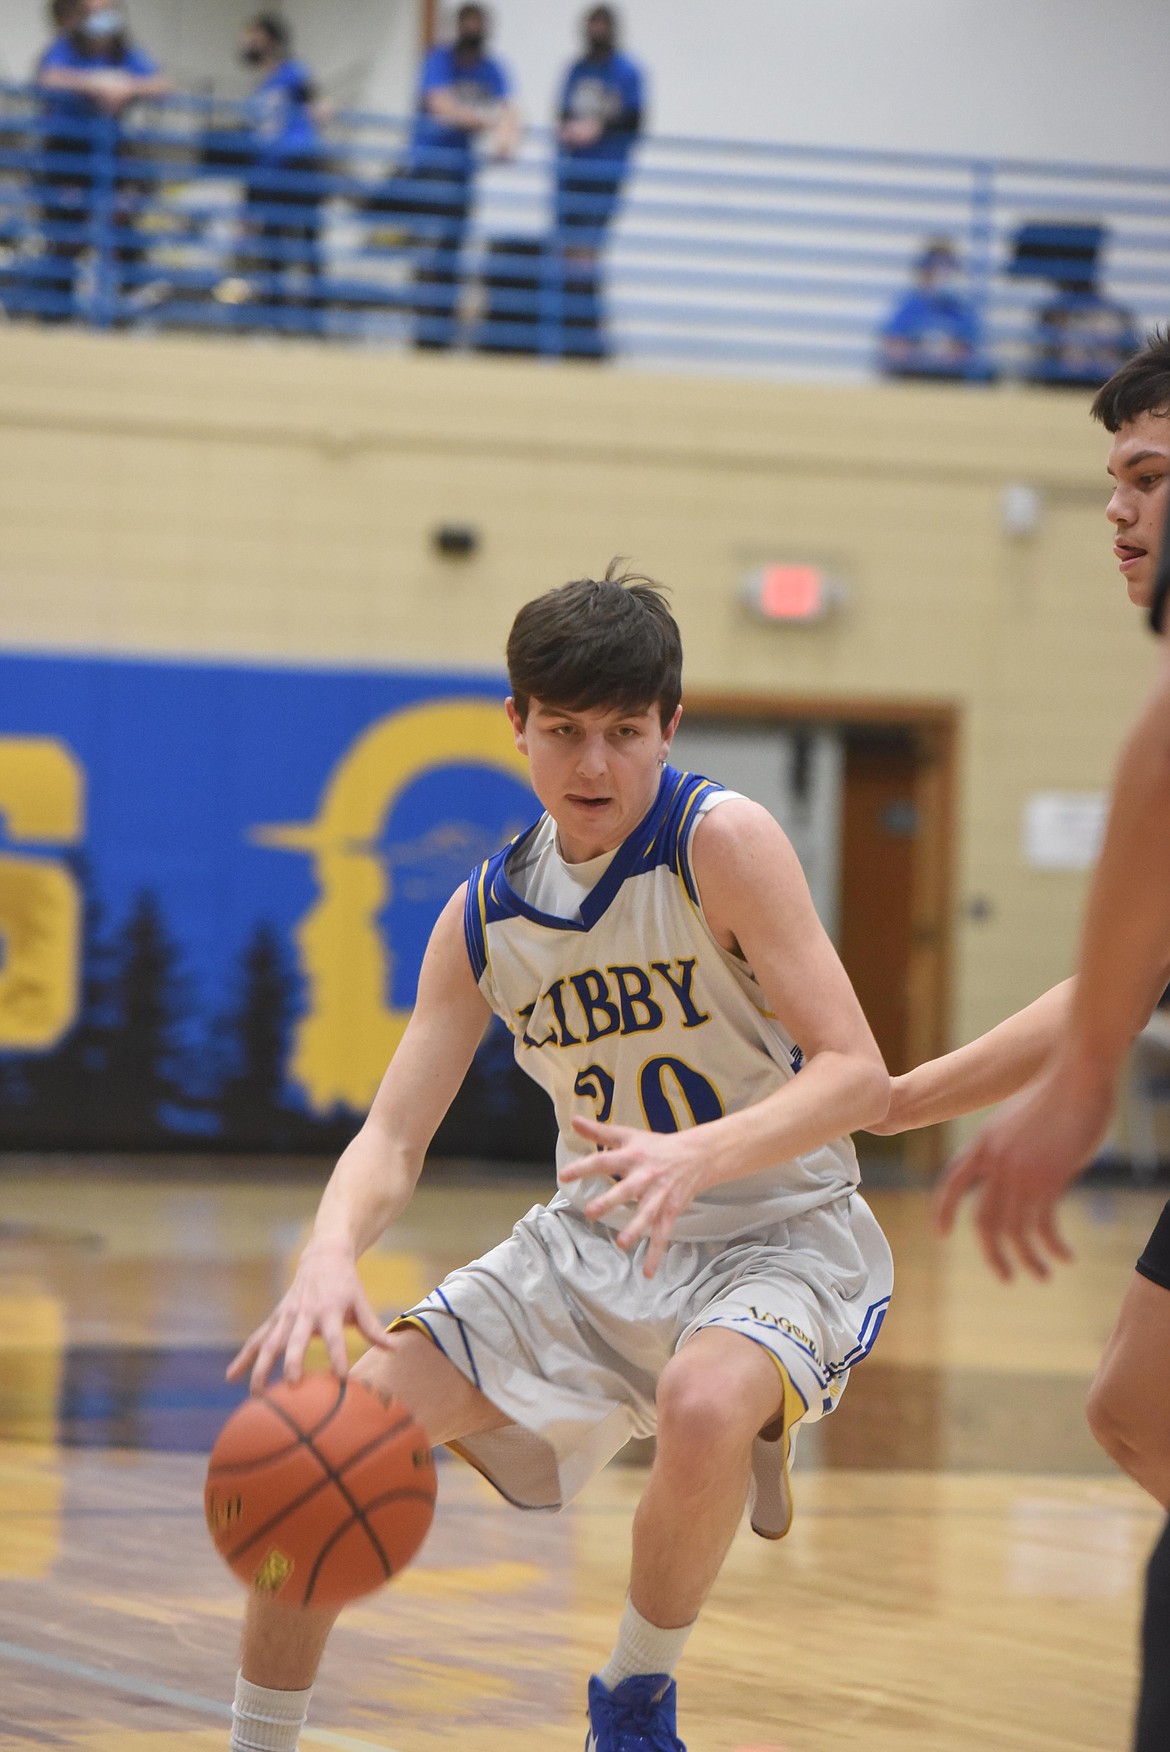 Senior guard Colton Halvorson looks for an opening in the Chiefs' defense during the Loggers' Jan. 14 game against Ronan. (Will Langhorne/The Western News)